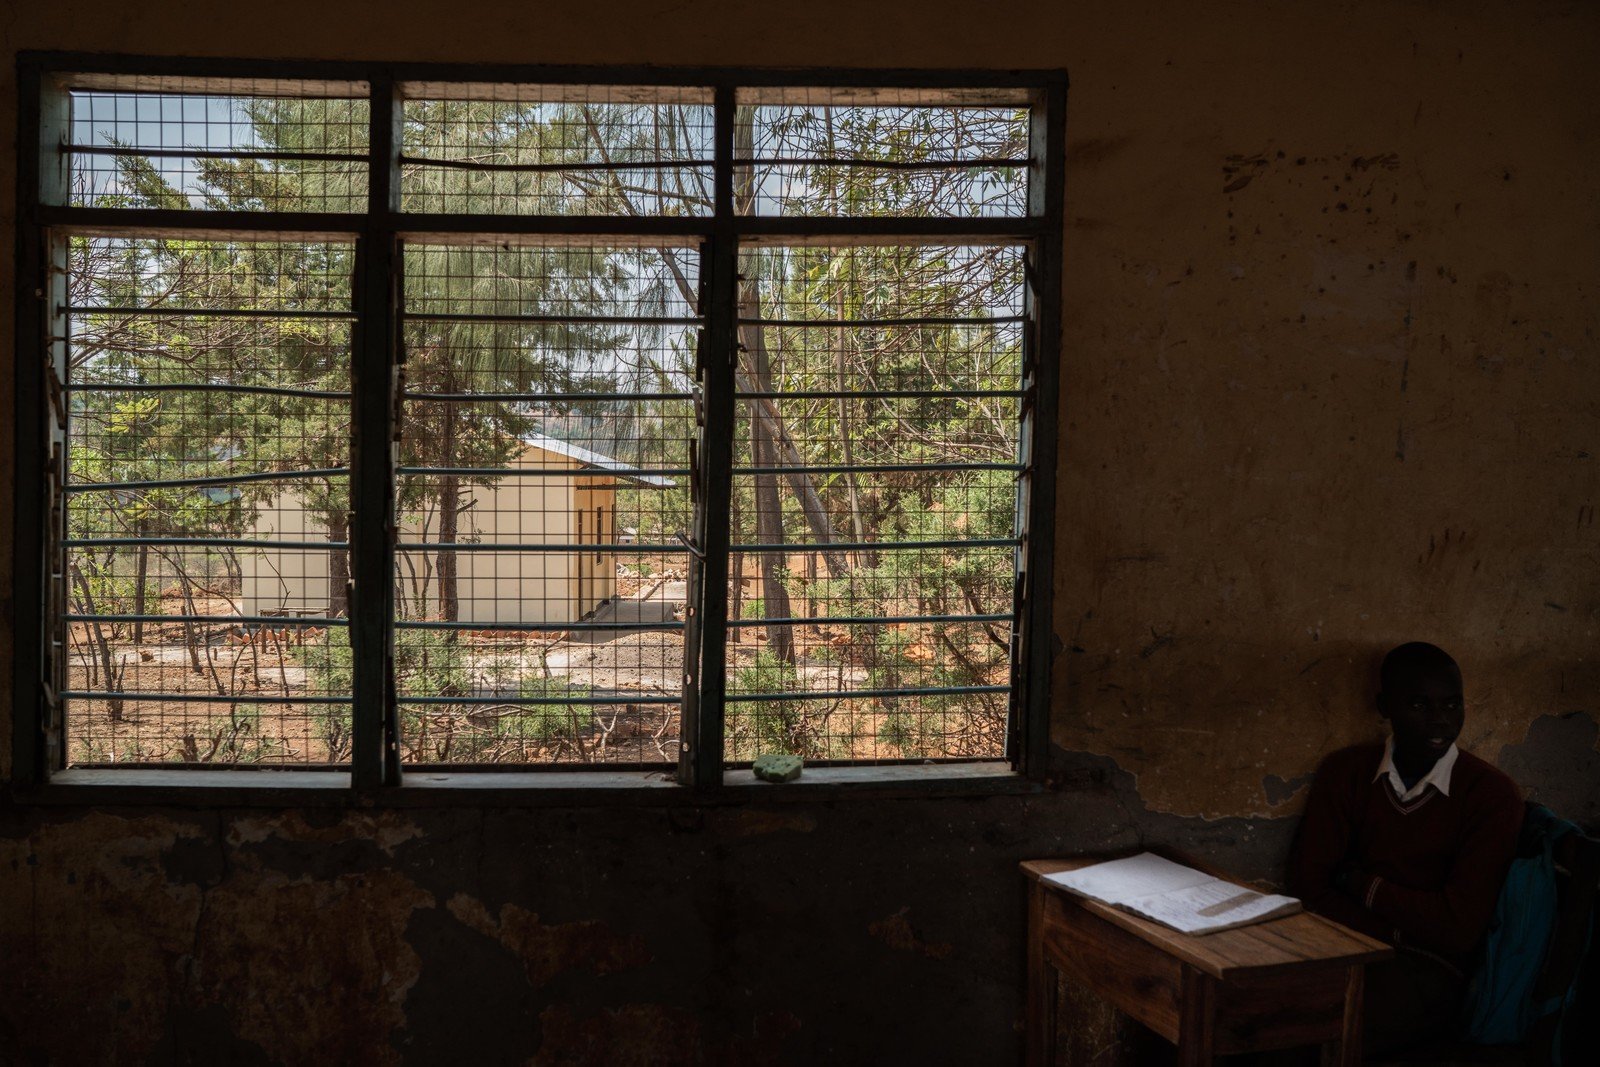 A secondary school in Rubanga had a serious shortage of classrooms in the past. After ‘animators’ reported this to government officials, staff were sent to build new classrooms. The newly built classrooms can be seen through the windows of the old building, and stand in contrast to it.